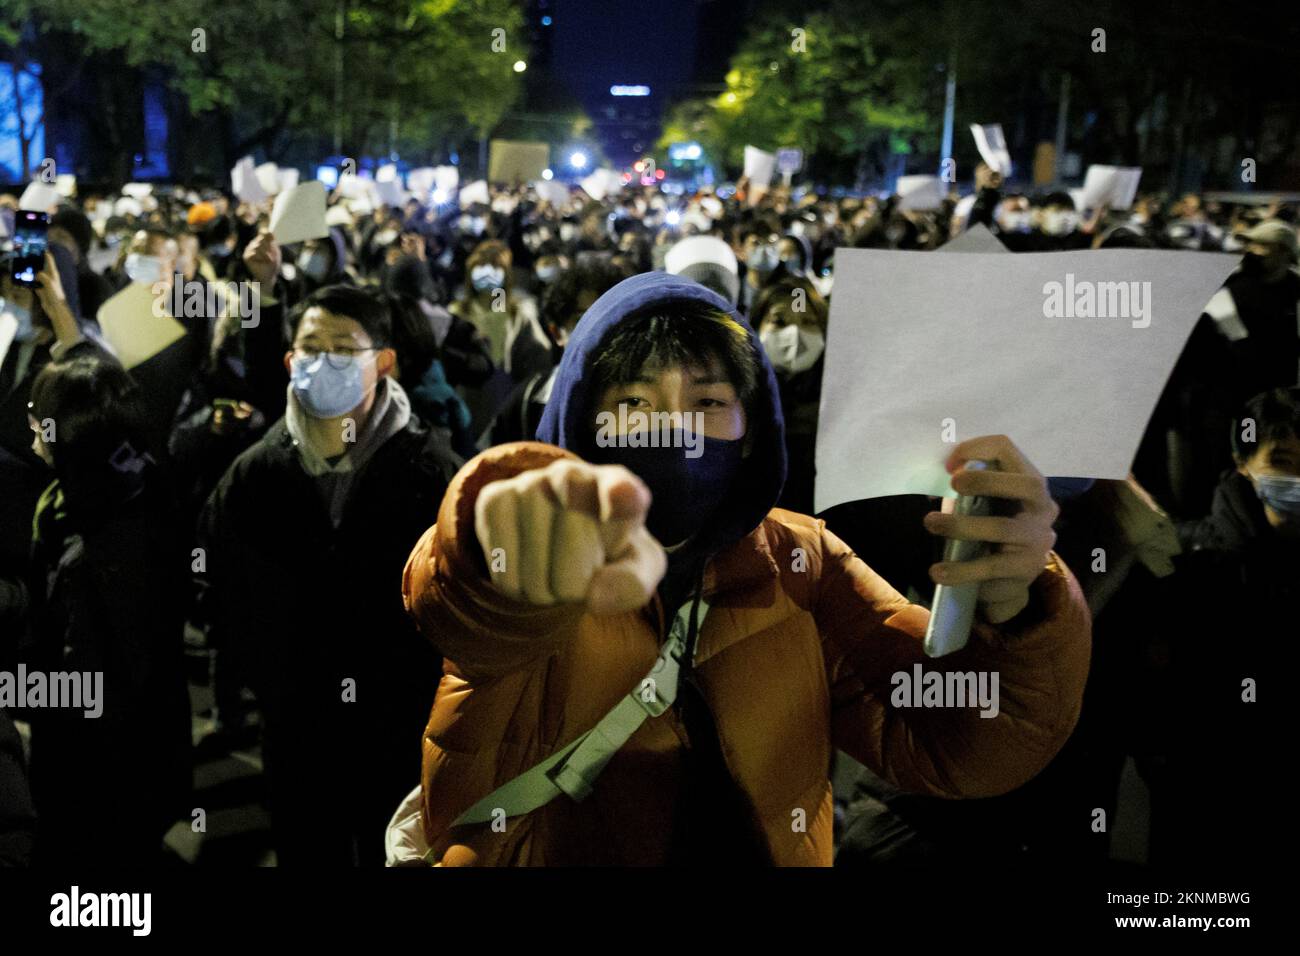 People hold white sheets of paper in protest over coronavirus disease (COVID-19) restrictions, after a vigil for the victims of a fire in Urumqi, as outbreaks of COVID-19 continue, in Beijing, China, November 27, 2022. REUTERS/Thomas Peter Stock Photo